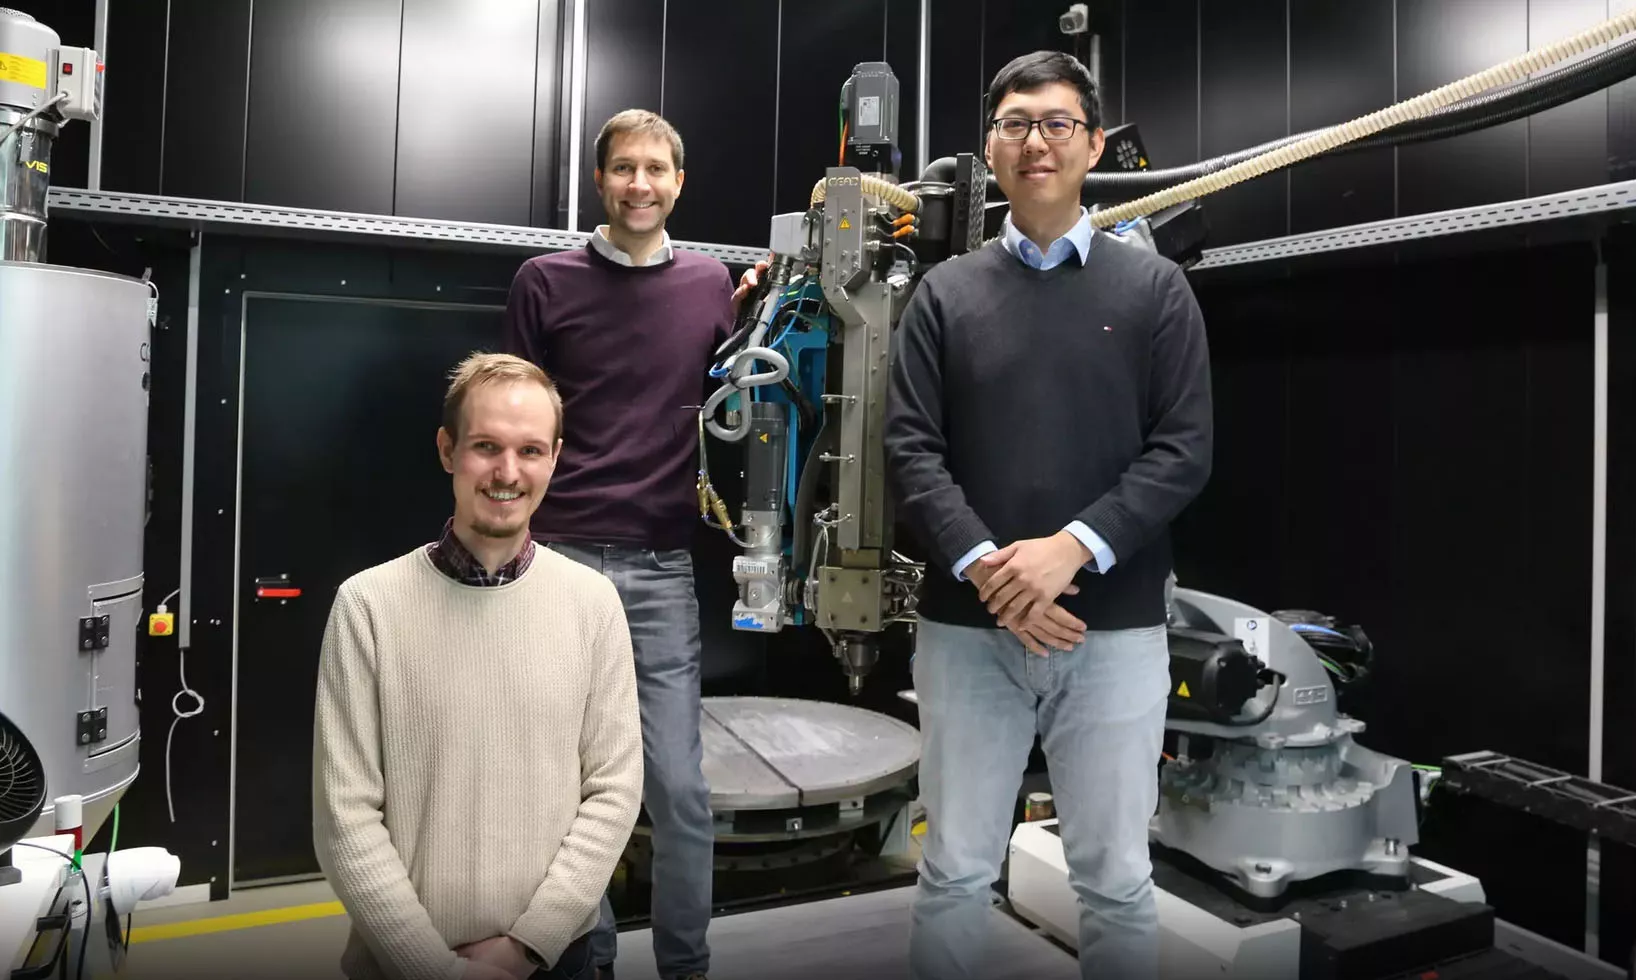 The three founders in front of a prototype of their technology: (from left to right) Patrick Consul, Benno Böckl and Ting Wang. Image: LEAM